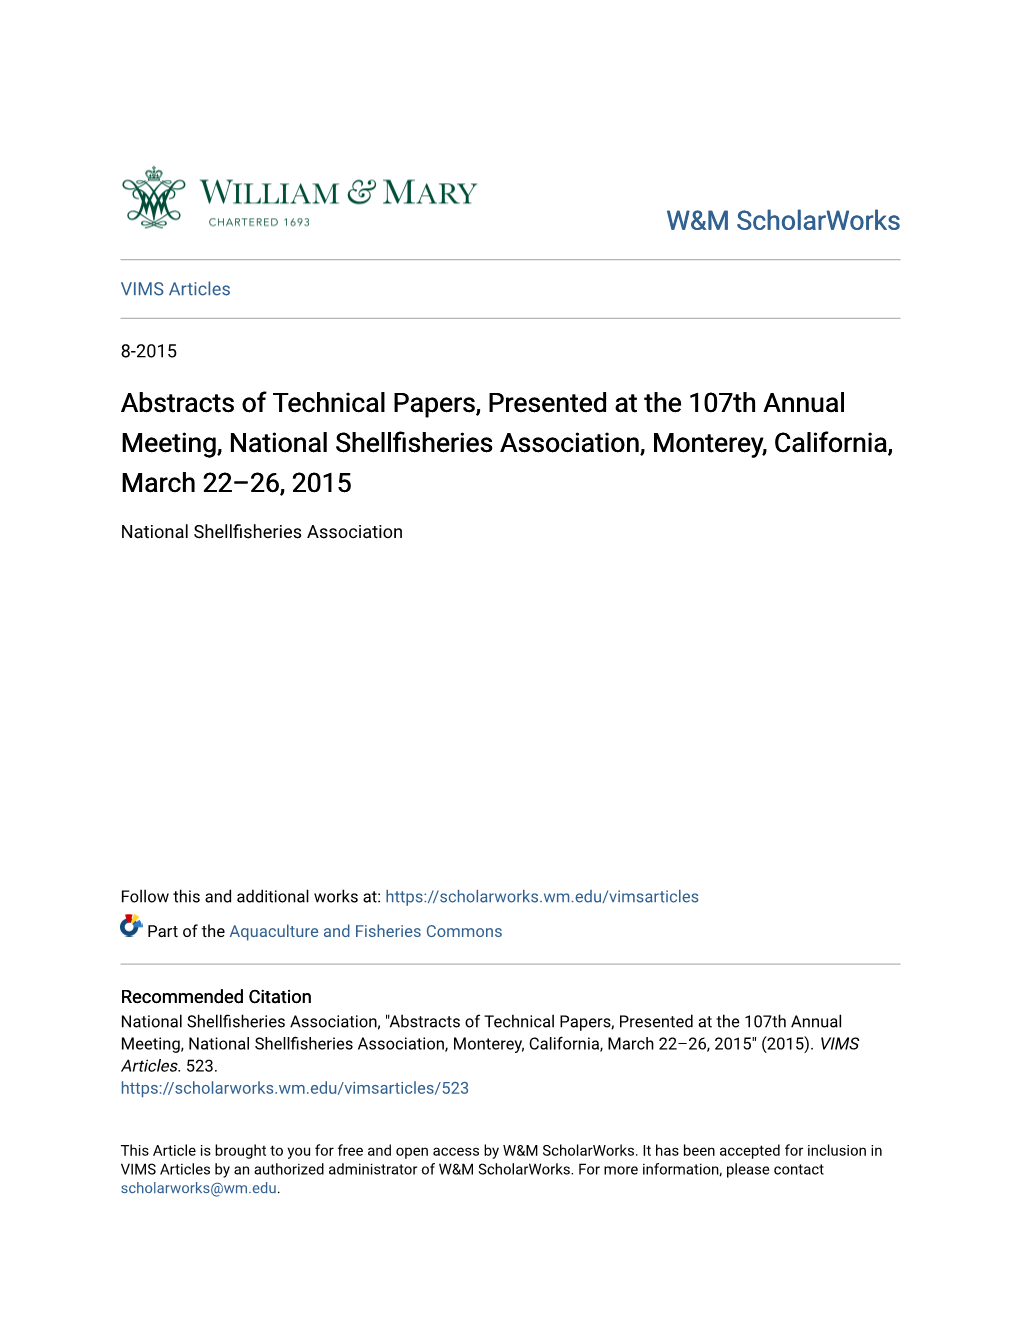 Abstracts of Technical Papers, Presented at the 107Th Annual Meeting, National Shellfisheries Association, Monterey, California, March 22–26, 2015